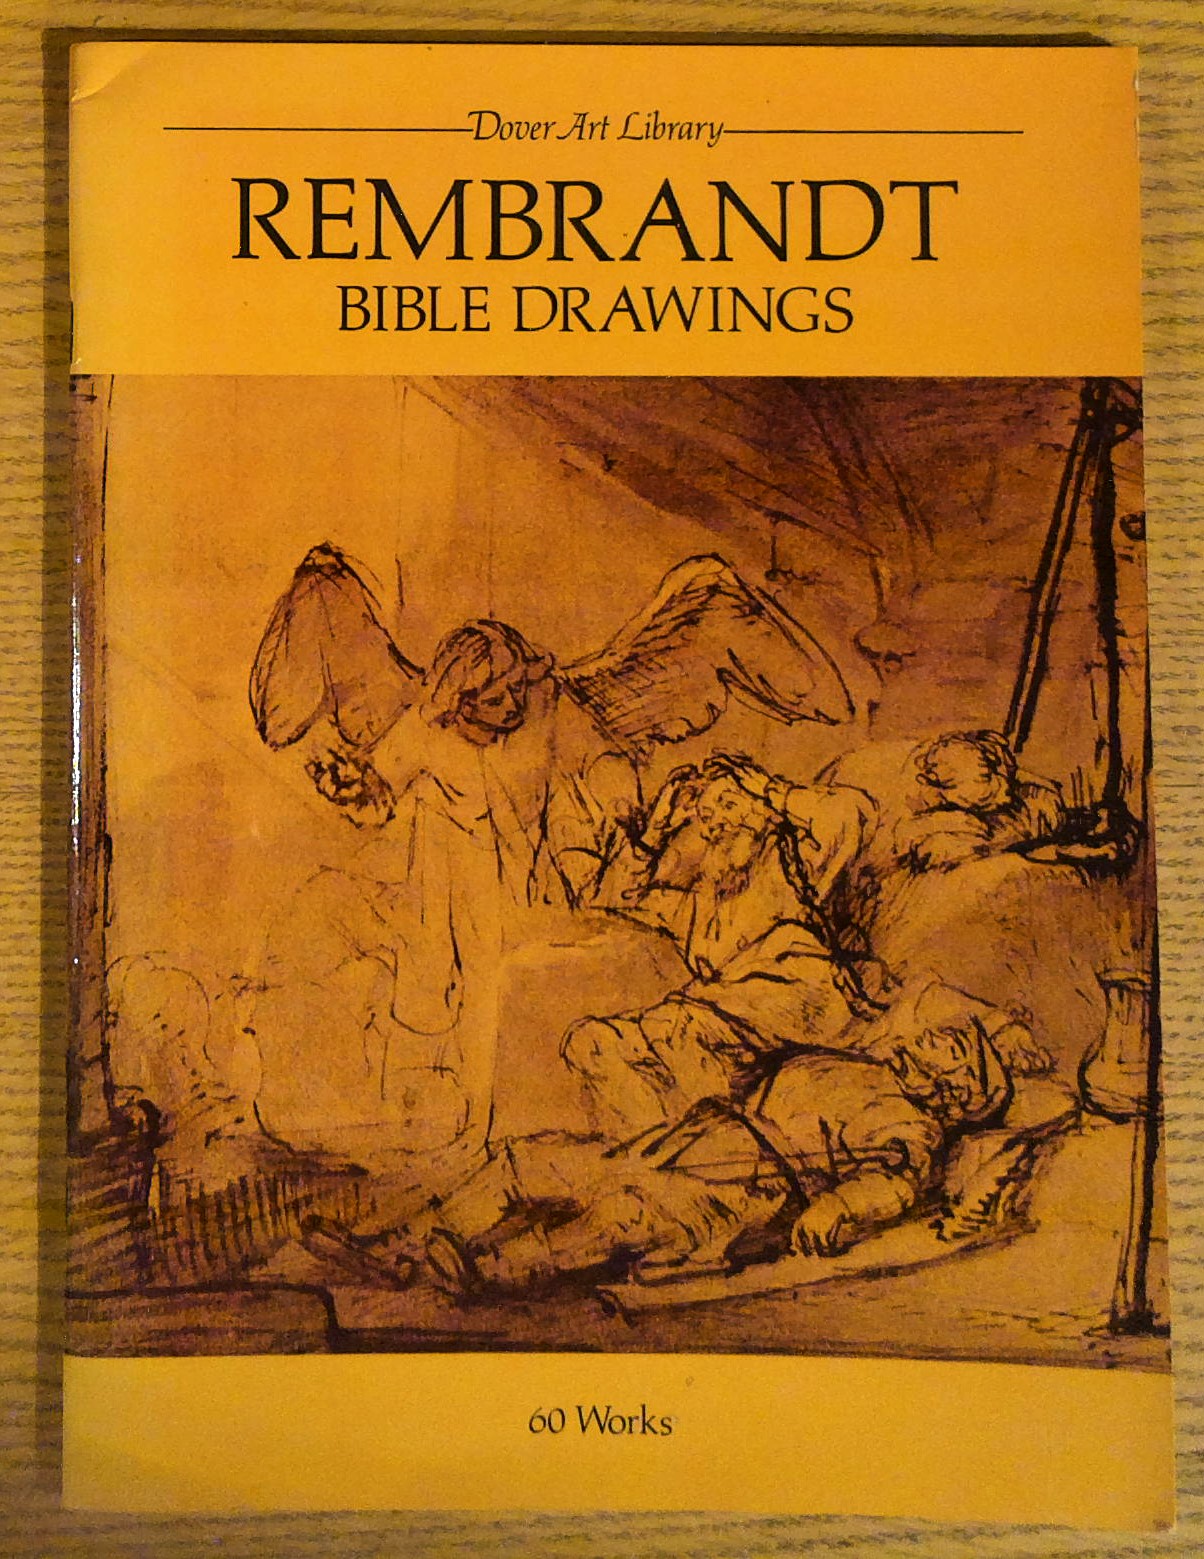 Rembrandt Bible Drawings: 60 Works